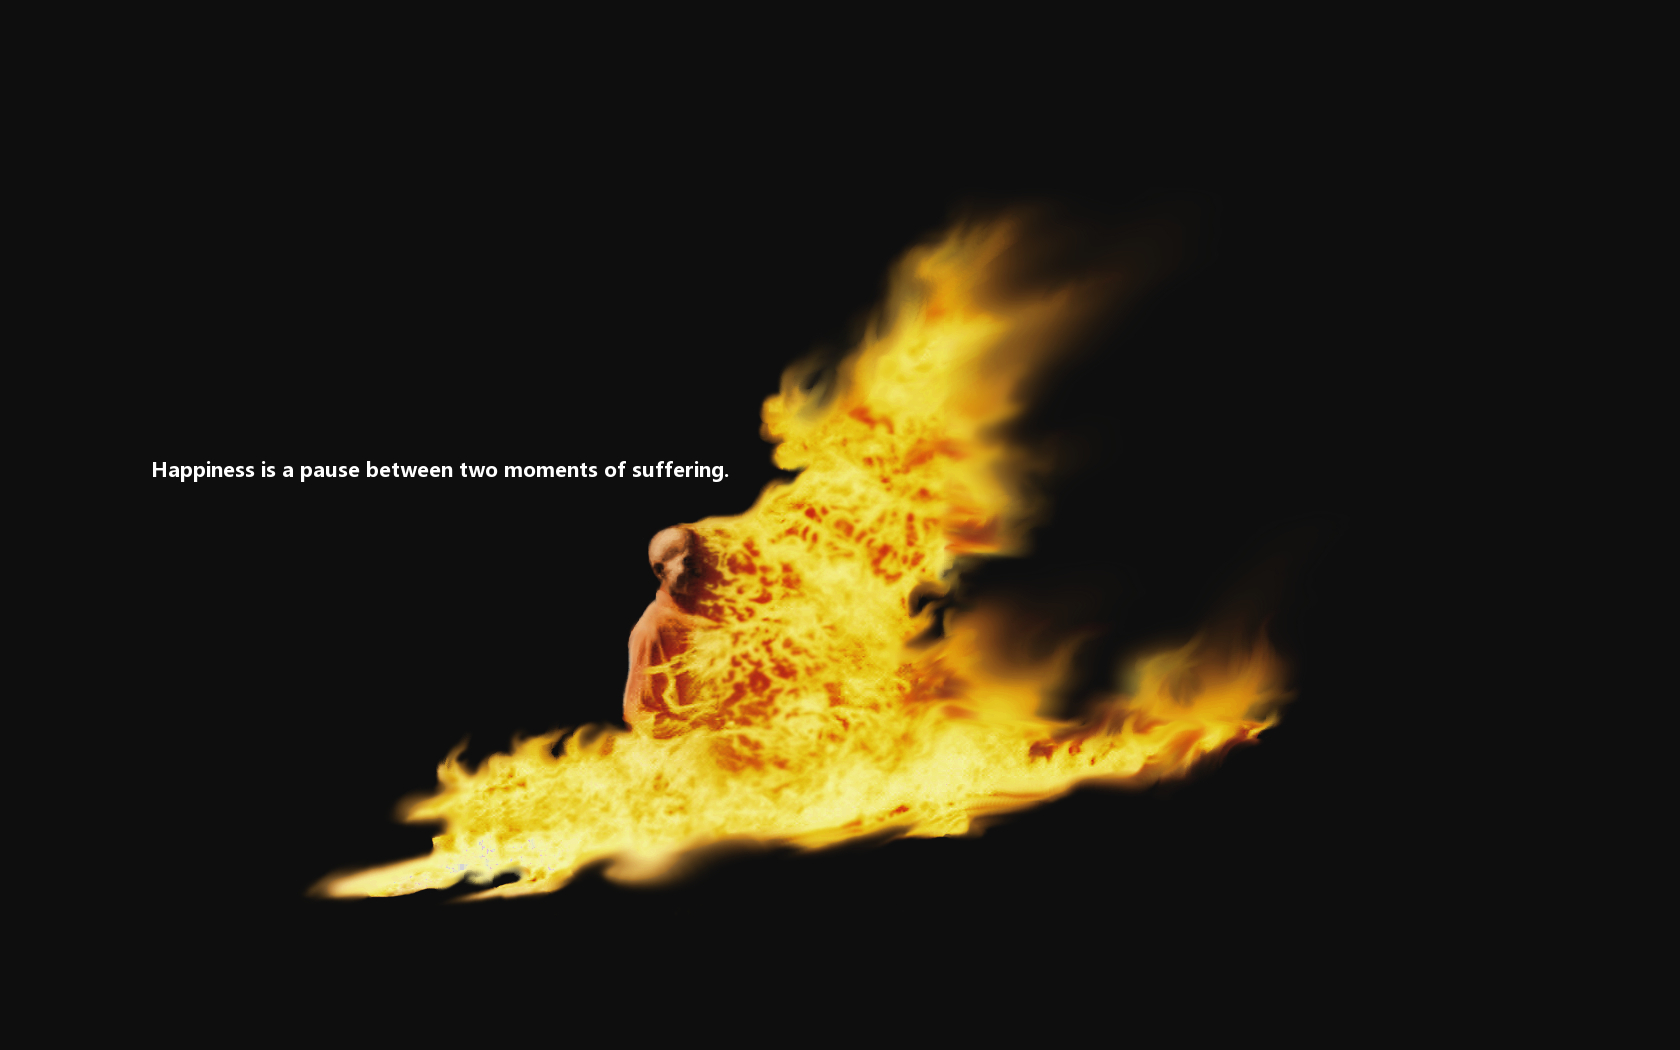 Burning Monk wallpaper - a strikingly powerful depiction of a Buddhist monk engulfed in flames